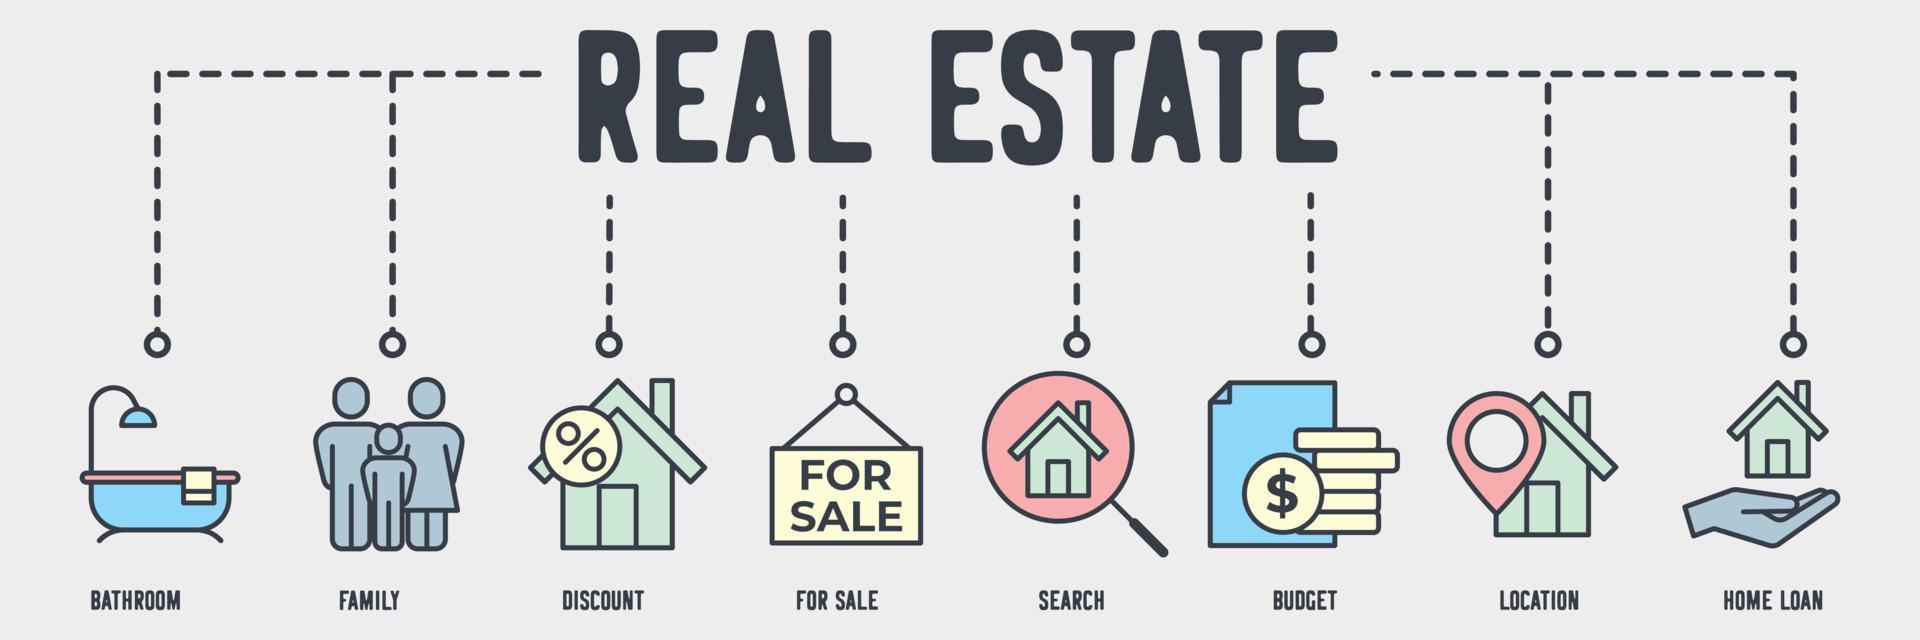 Real Estate banner web icon. for sale, change, house key, bedroom, pool, contract, purchase, toilet, bathroom vector illustration concept.